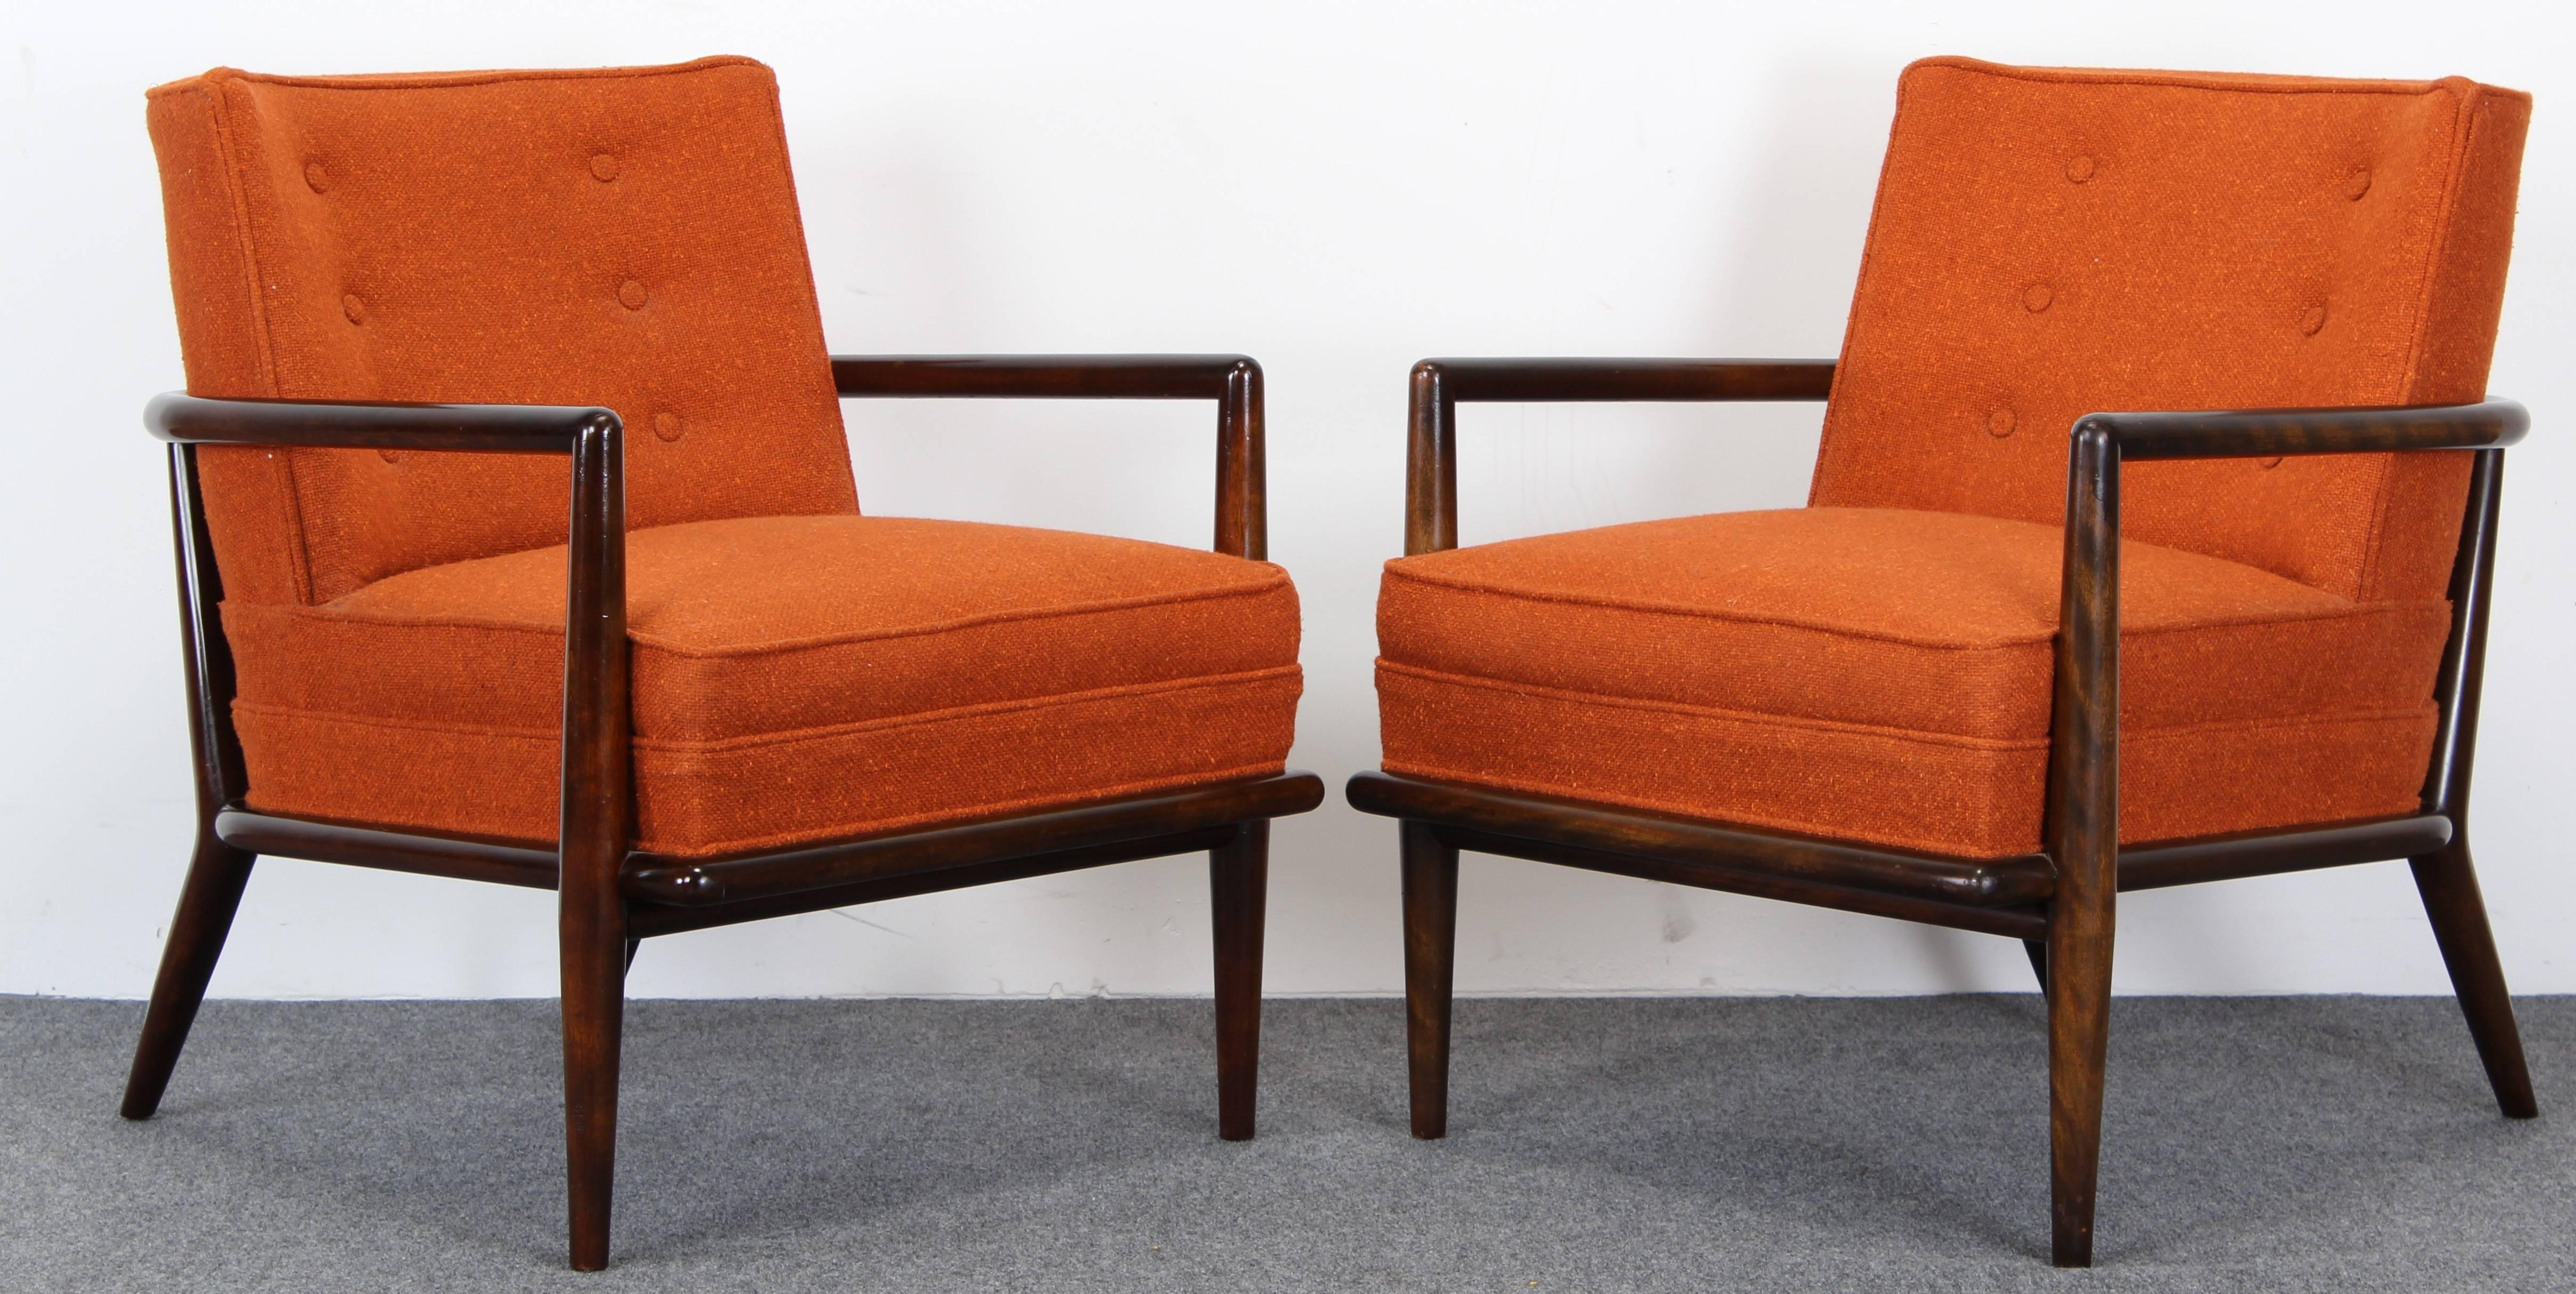 A rare pair of deep brown stained lounge (tub) chairs as shown in catalog, model number 1721, with possibly original upholstery designed by T.H. Robsjohn-Gibbings for Widdicomb. Labelled True Grand Rapids underside. Some minor scuffs to wood as